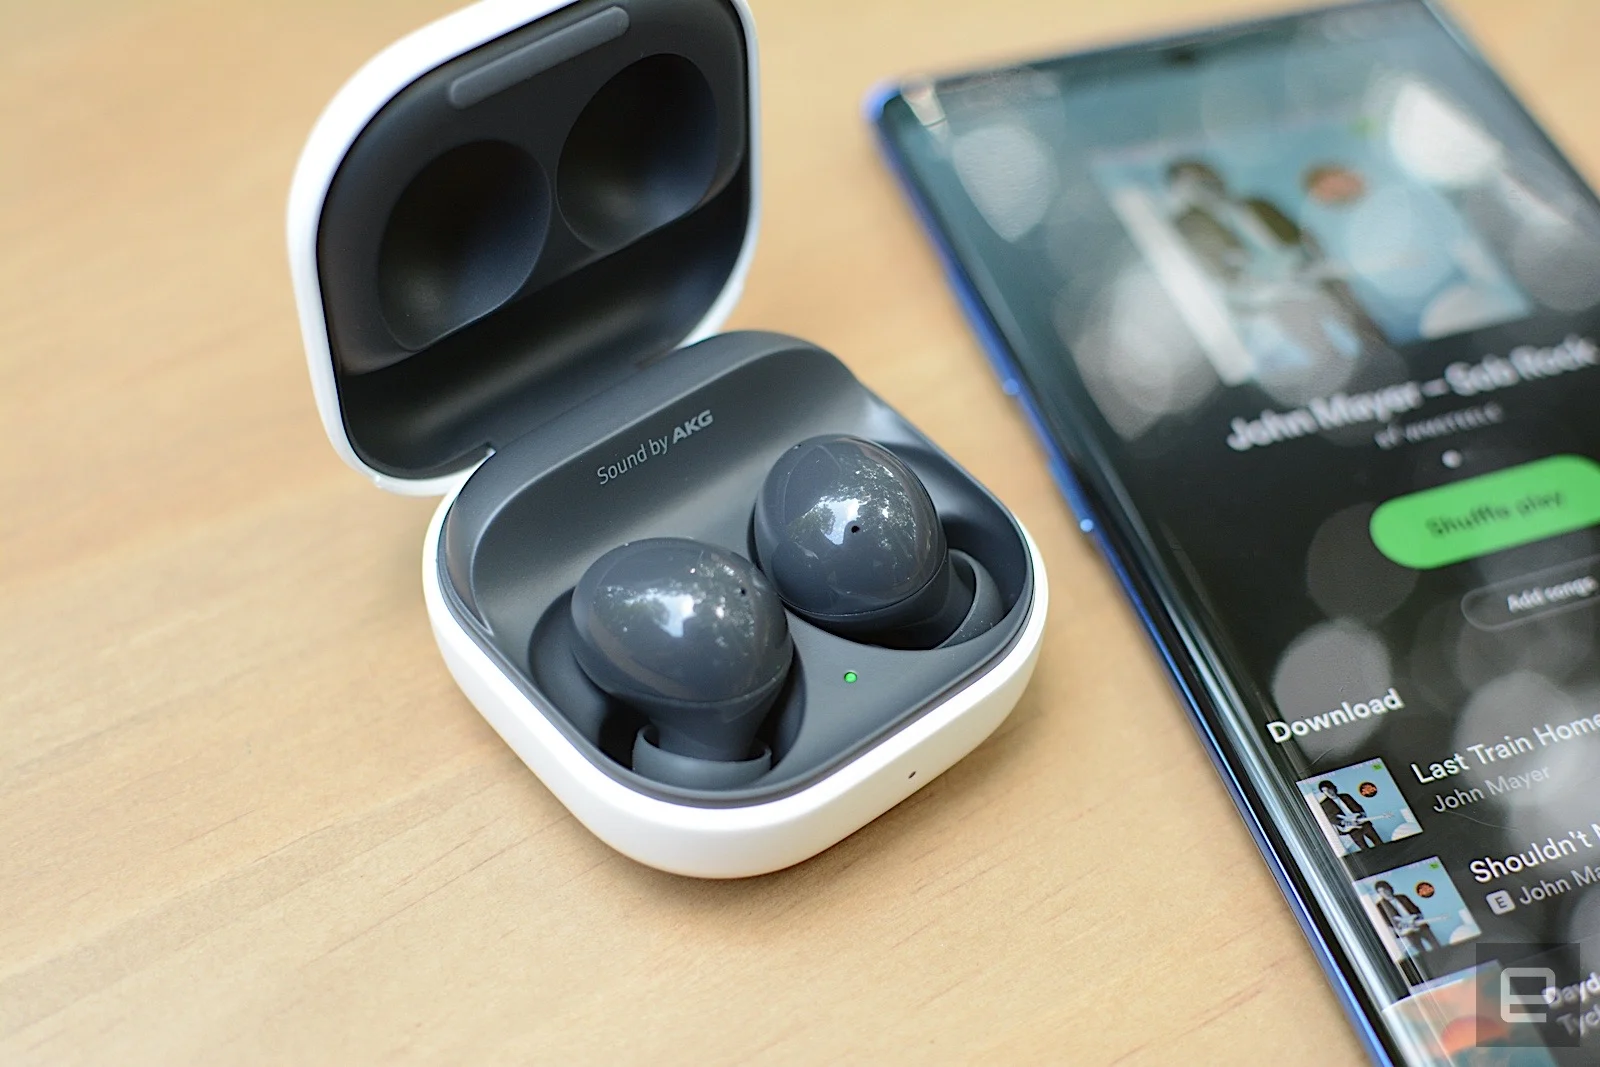 With the Galaxy Buds 2, Samsung adds active noise cancellation to its most affordable true wireless earbuds. This successor to the Galaxy Buds+ are smaller and more comfortable with premium features like wireless charging and adjustable ambient sound. However, ANC performance is only decent and there’s no deep iOS integration like previous models. Still, at this price, Samsung has created a compelling package despite the sacrifices. 